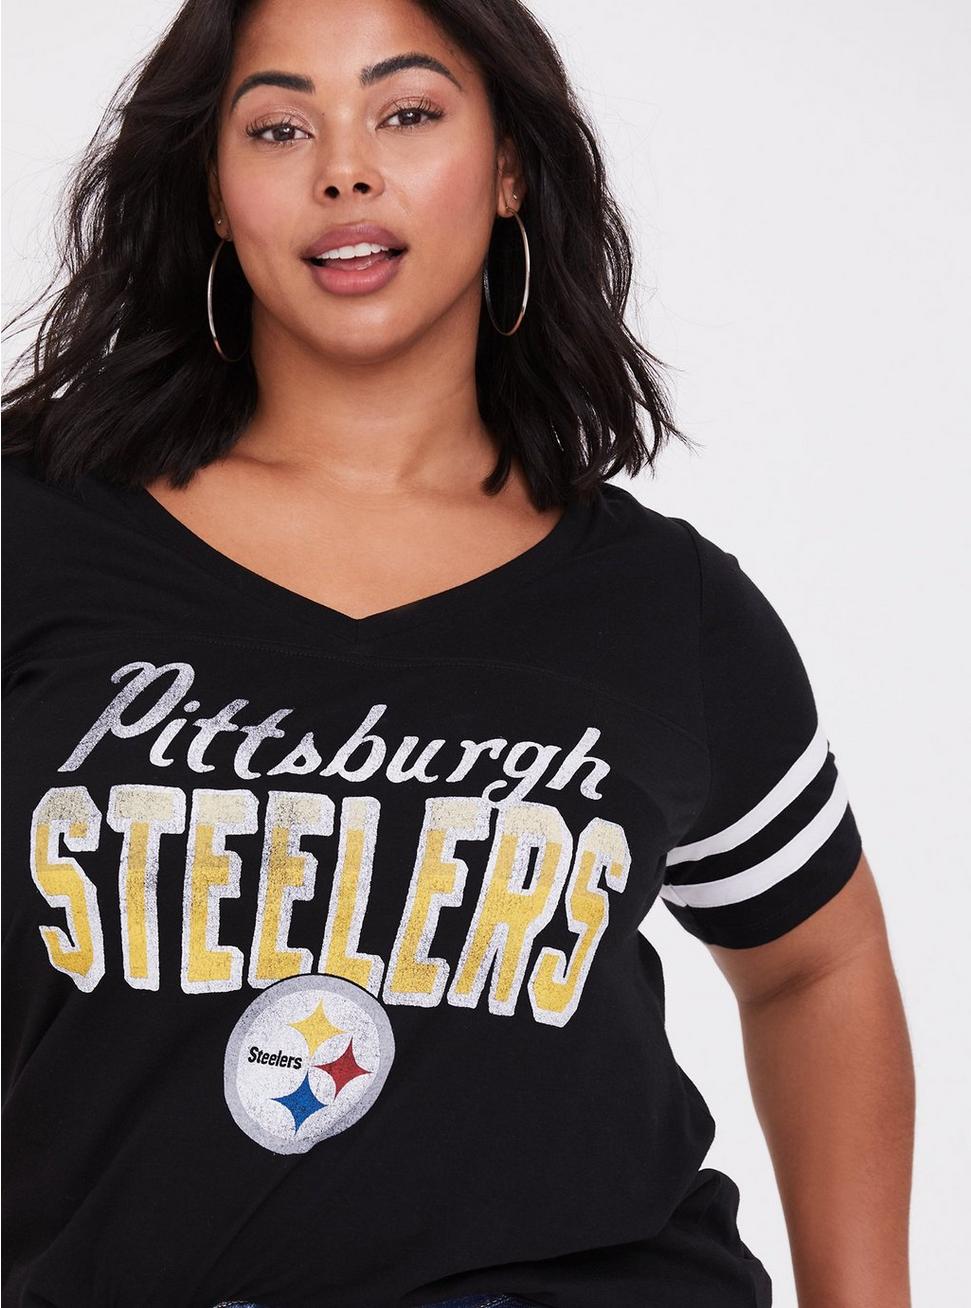 women's plus size pittsburgh steelers shirts